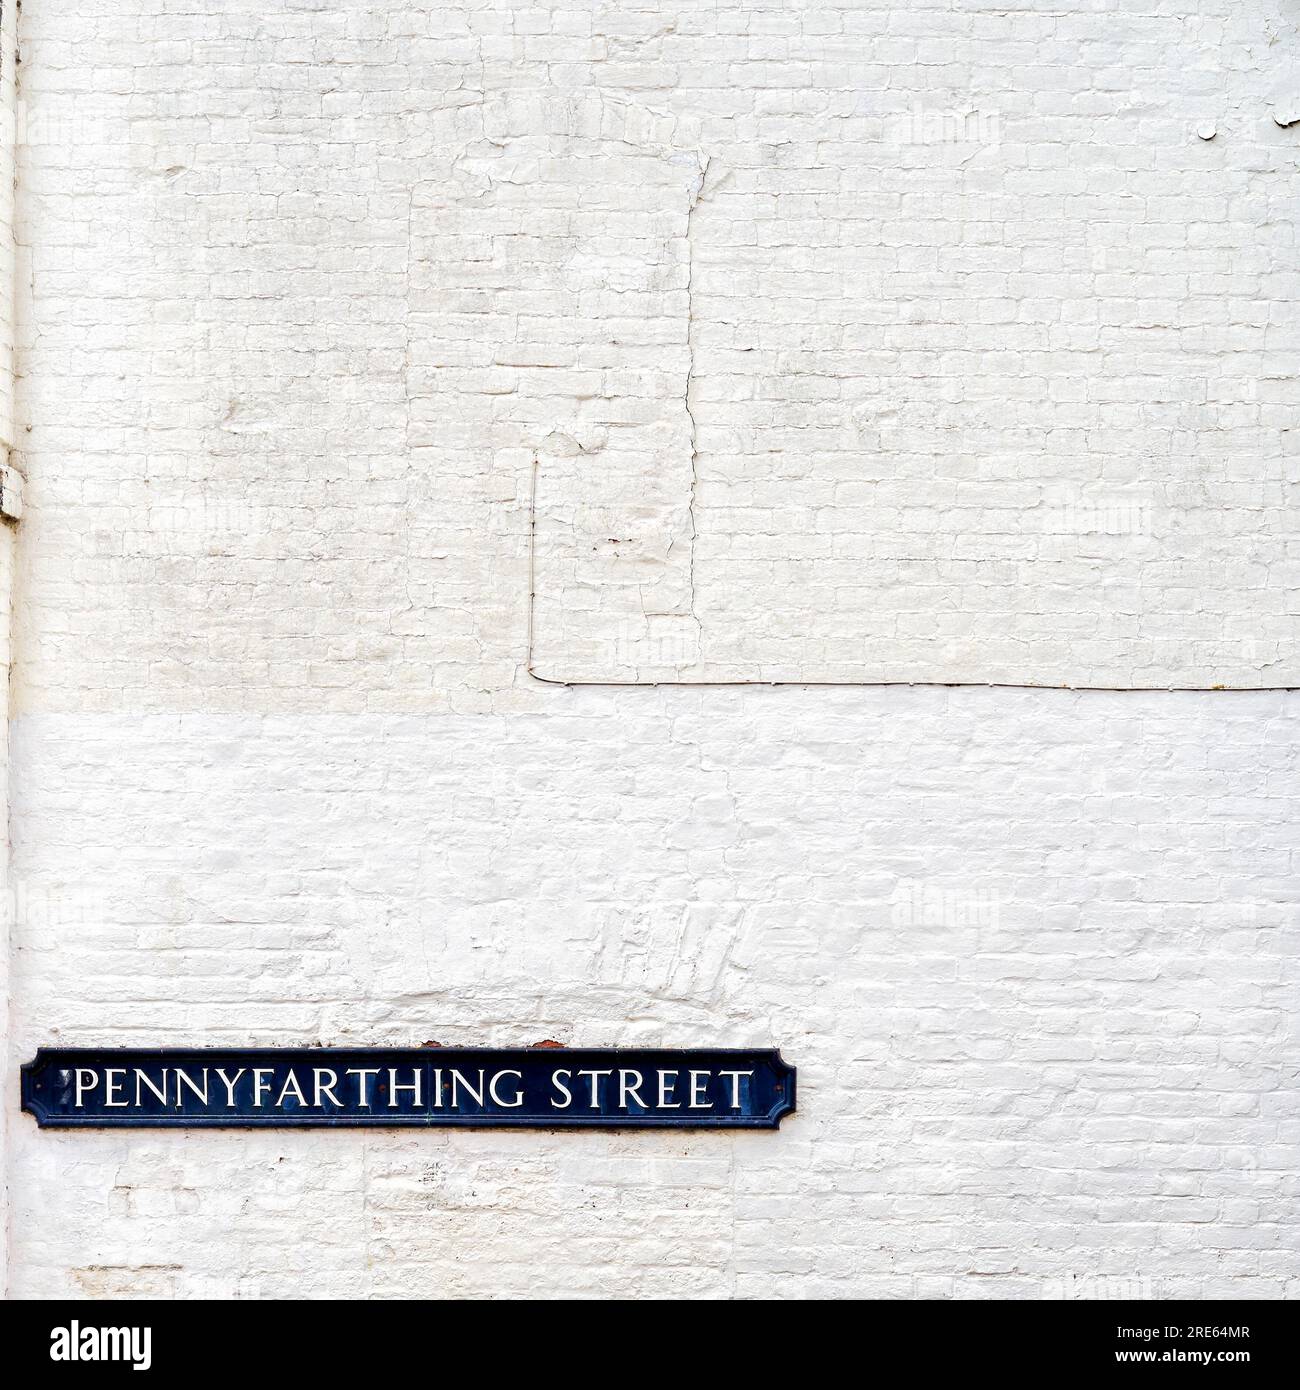 Pennyfarthing street sign on white painted brick wall Stock Photo